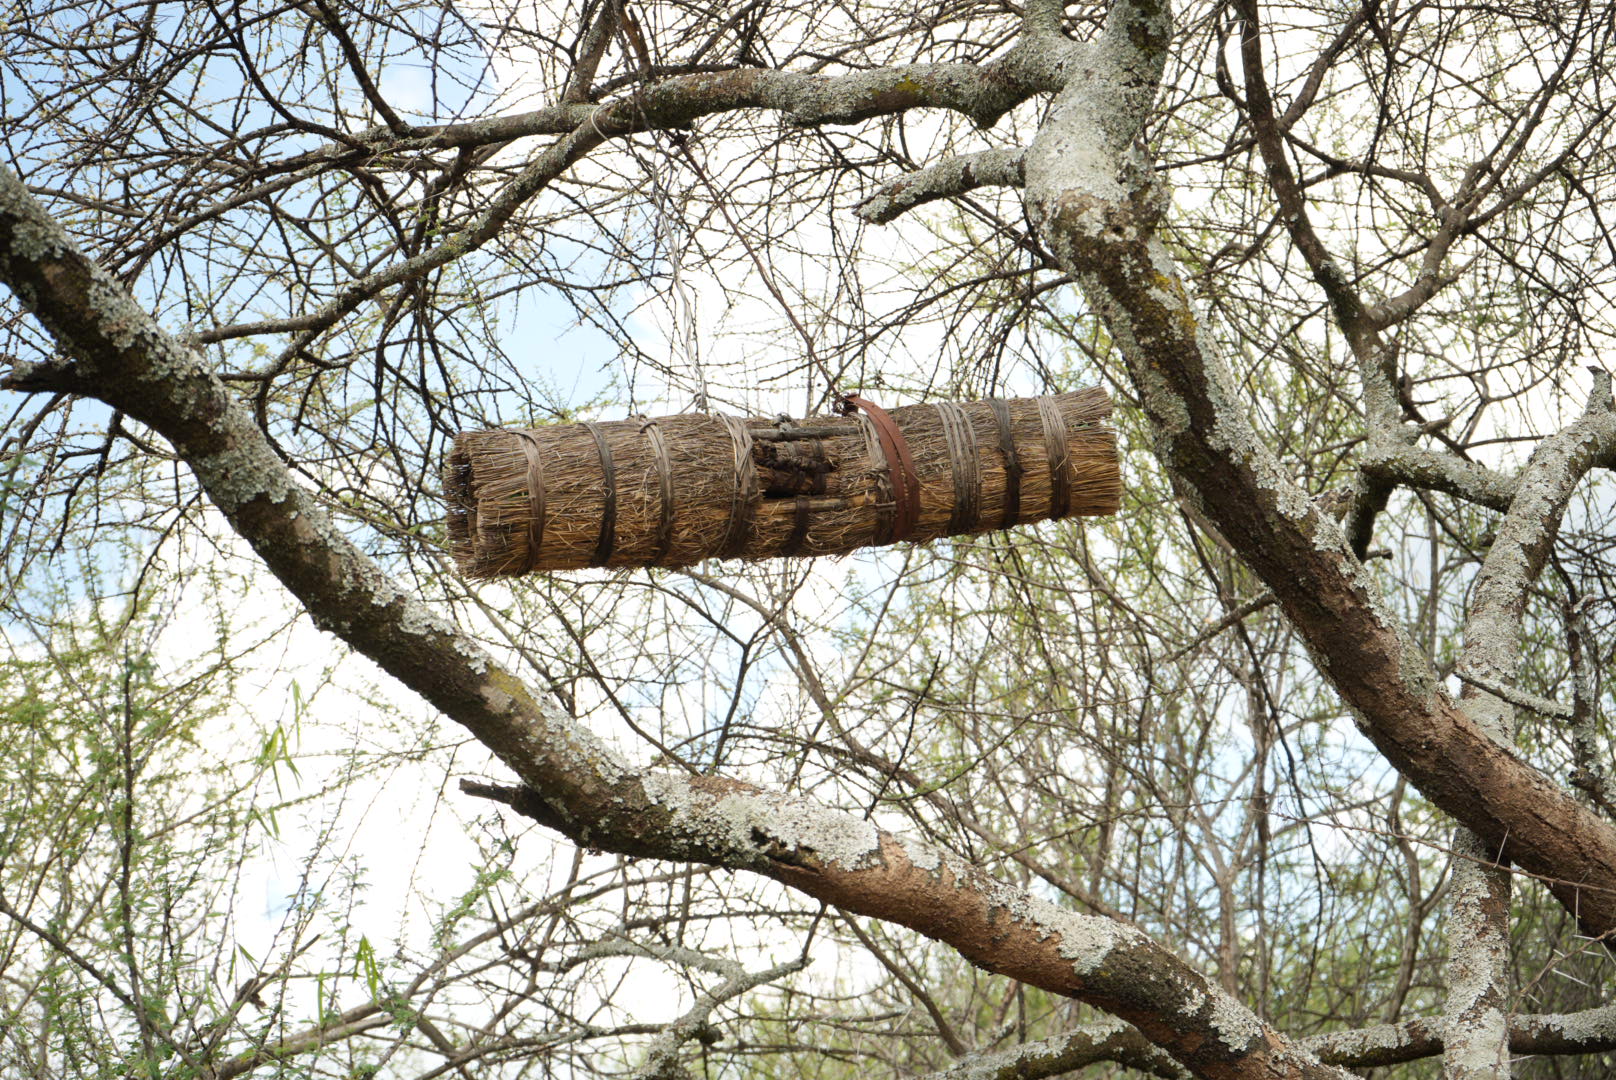 A traditional beehive is suspended from an acacia tree at Sugot-Barpello road in East Pokot, Baringo County. Commercial beekeeping is being encouraged by the Incarnate Word Sisters through women's table banking groups. The sale of wild honey provides income for families and reduces dependence on aid from the congregation. (GSR photo/Wycliff Peter Oundo)